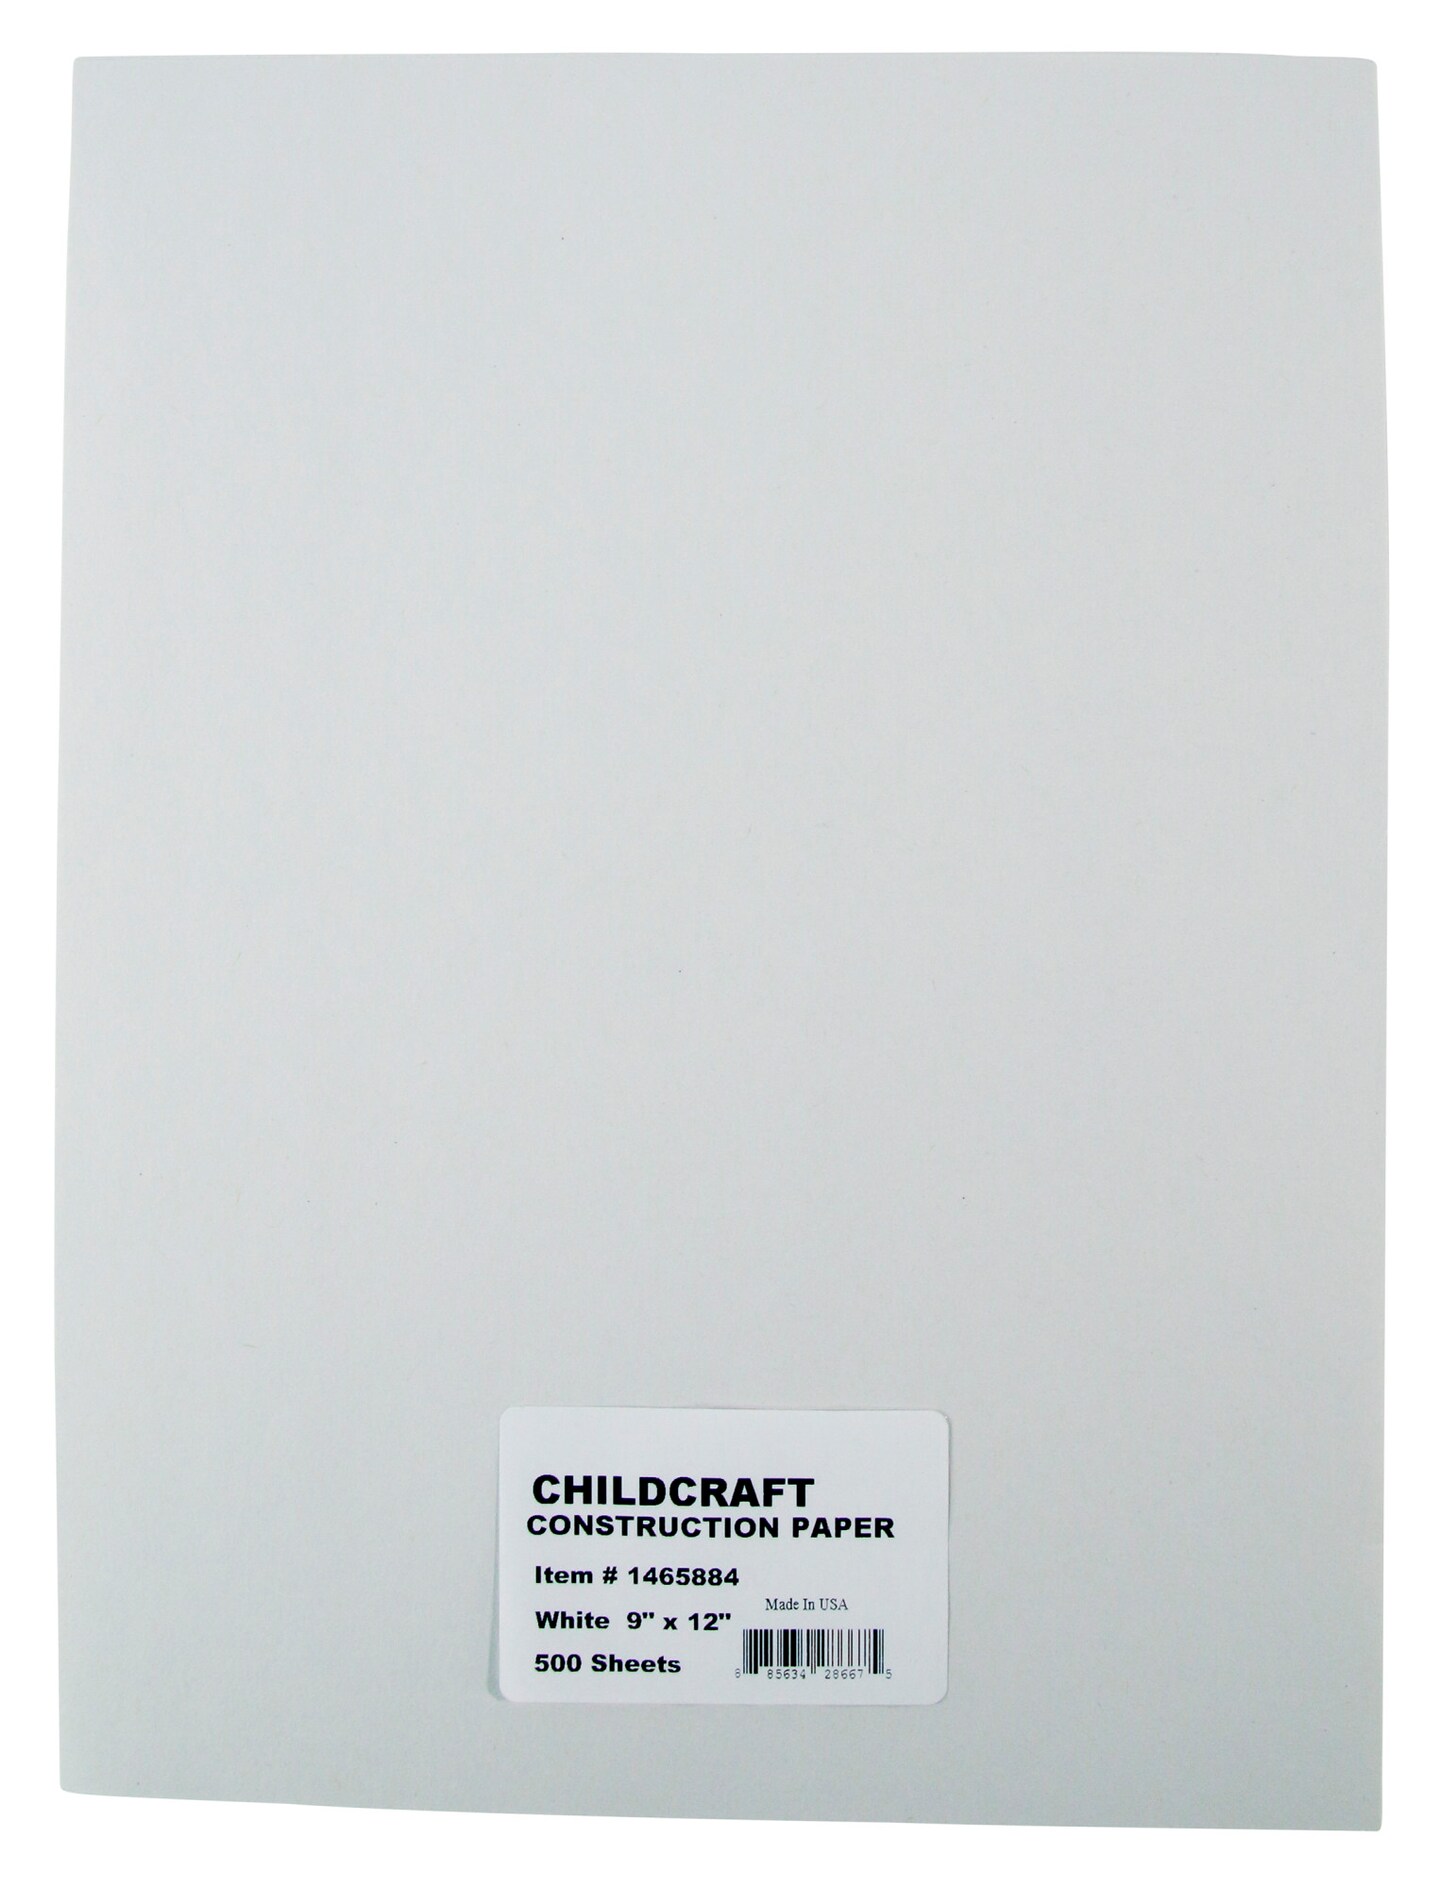 Childcraft Construction Paper, 9 x 12 Inches, White, 500 Sheets